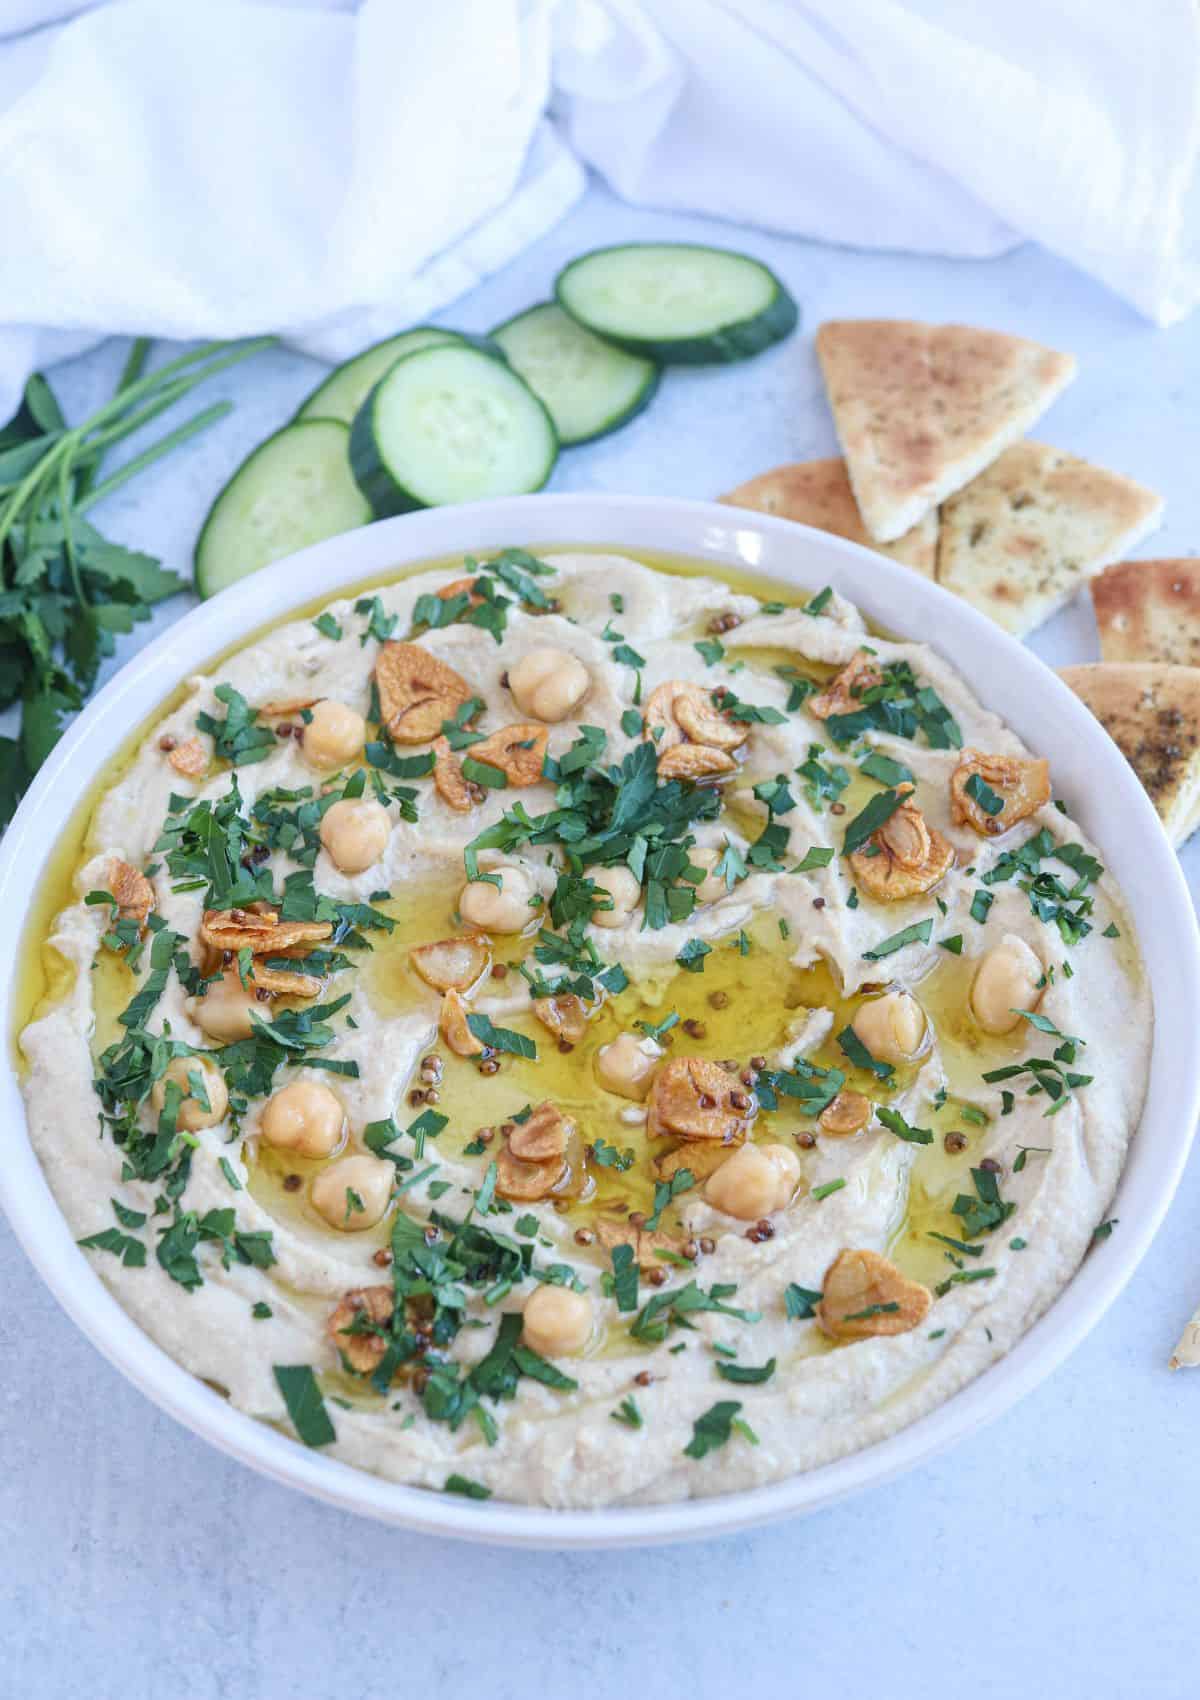 whole chickpea hummus in a white bowl topped with oil, chopped parsley, fried garlic, chickpeas with a side of pita chips, cucumber and parsley.